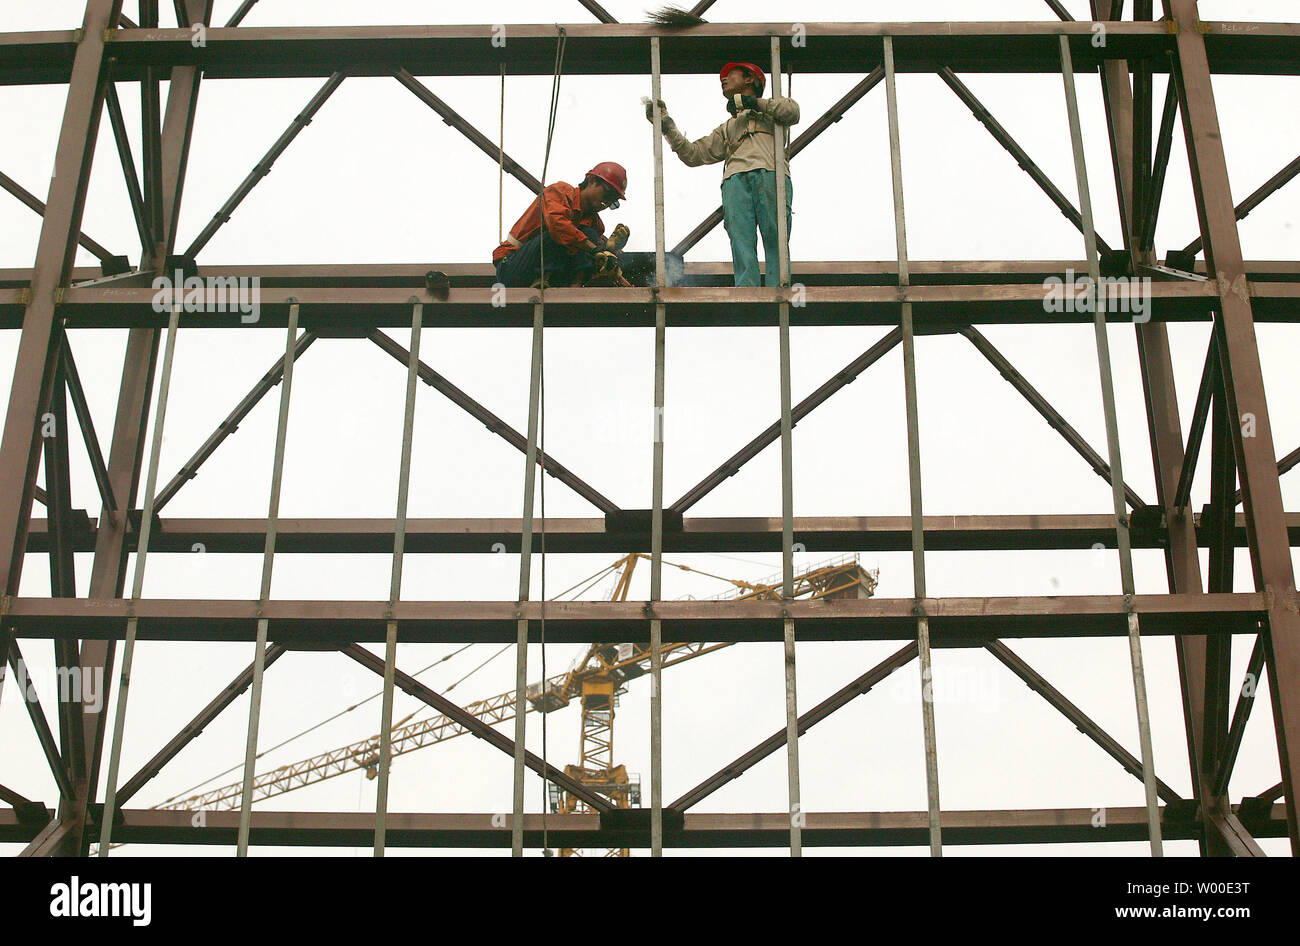 Chinese construction workers assemble steel scaffolding on an Olympic facility in central Beijing, August 2, 2006.  Officials are examining new steps to cool off China's sizzling economy as its top planning agency called for tighter bank credit and curbs on construction, state media reported.  The reports Wednesday suggested Beijing believes earlier measures, including an interest rate rise in April, are failing to contain runaway growth in spending on factories and other assets that Chinese leaders worry could ignite a financial crisis.  (UPI Photo/Stephen Shaver) Stock Photo